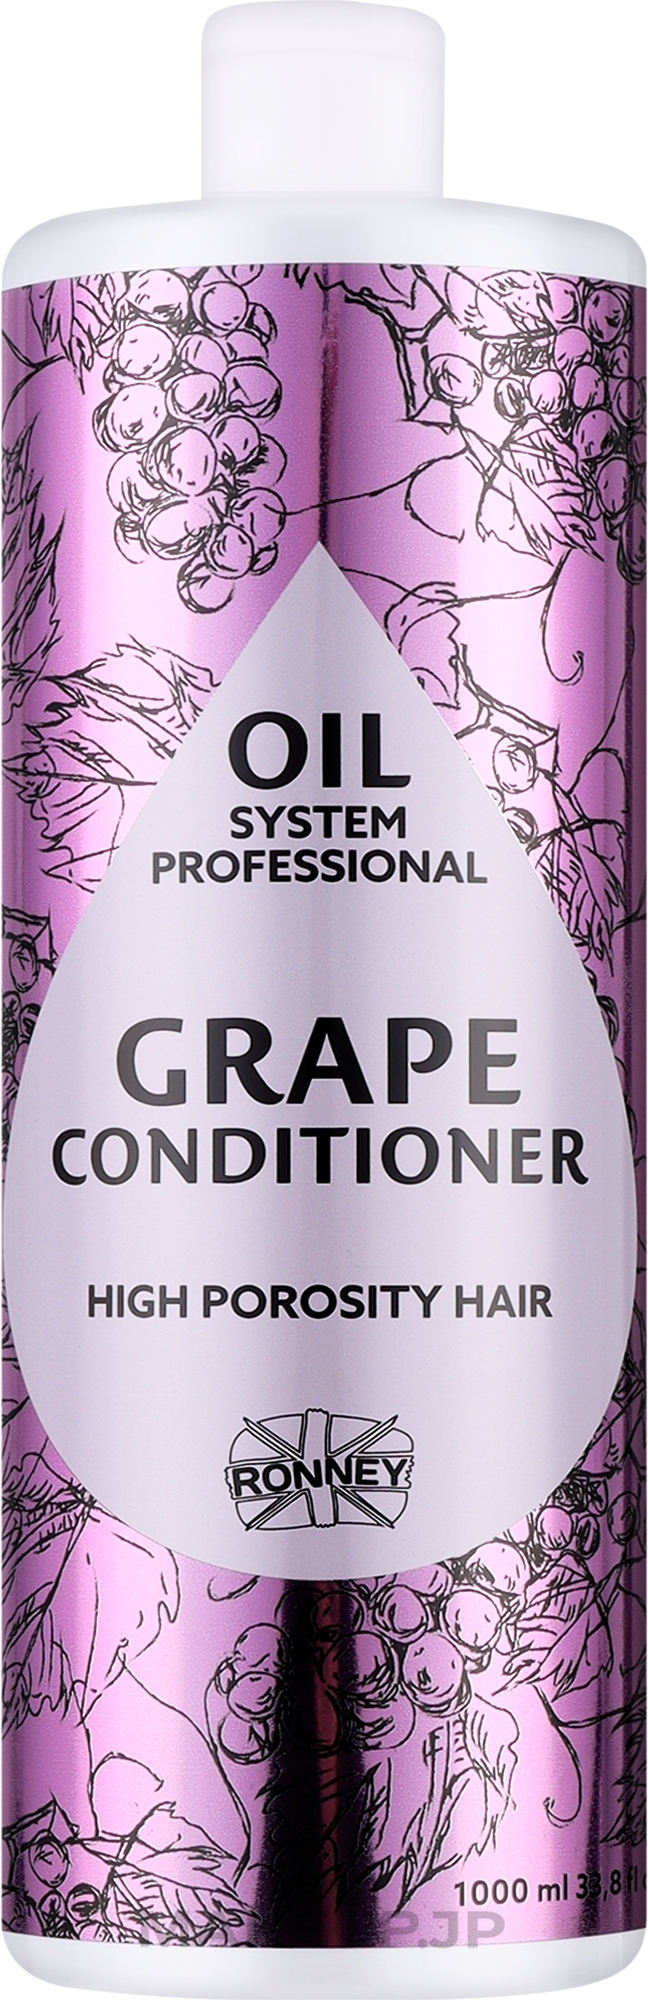 Grape Oil Conditioner for Highly Porous Hair - Ronney Professional Oil System High Porosity Hair Grape Conditioner	 — photo 1000 ml